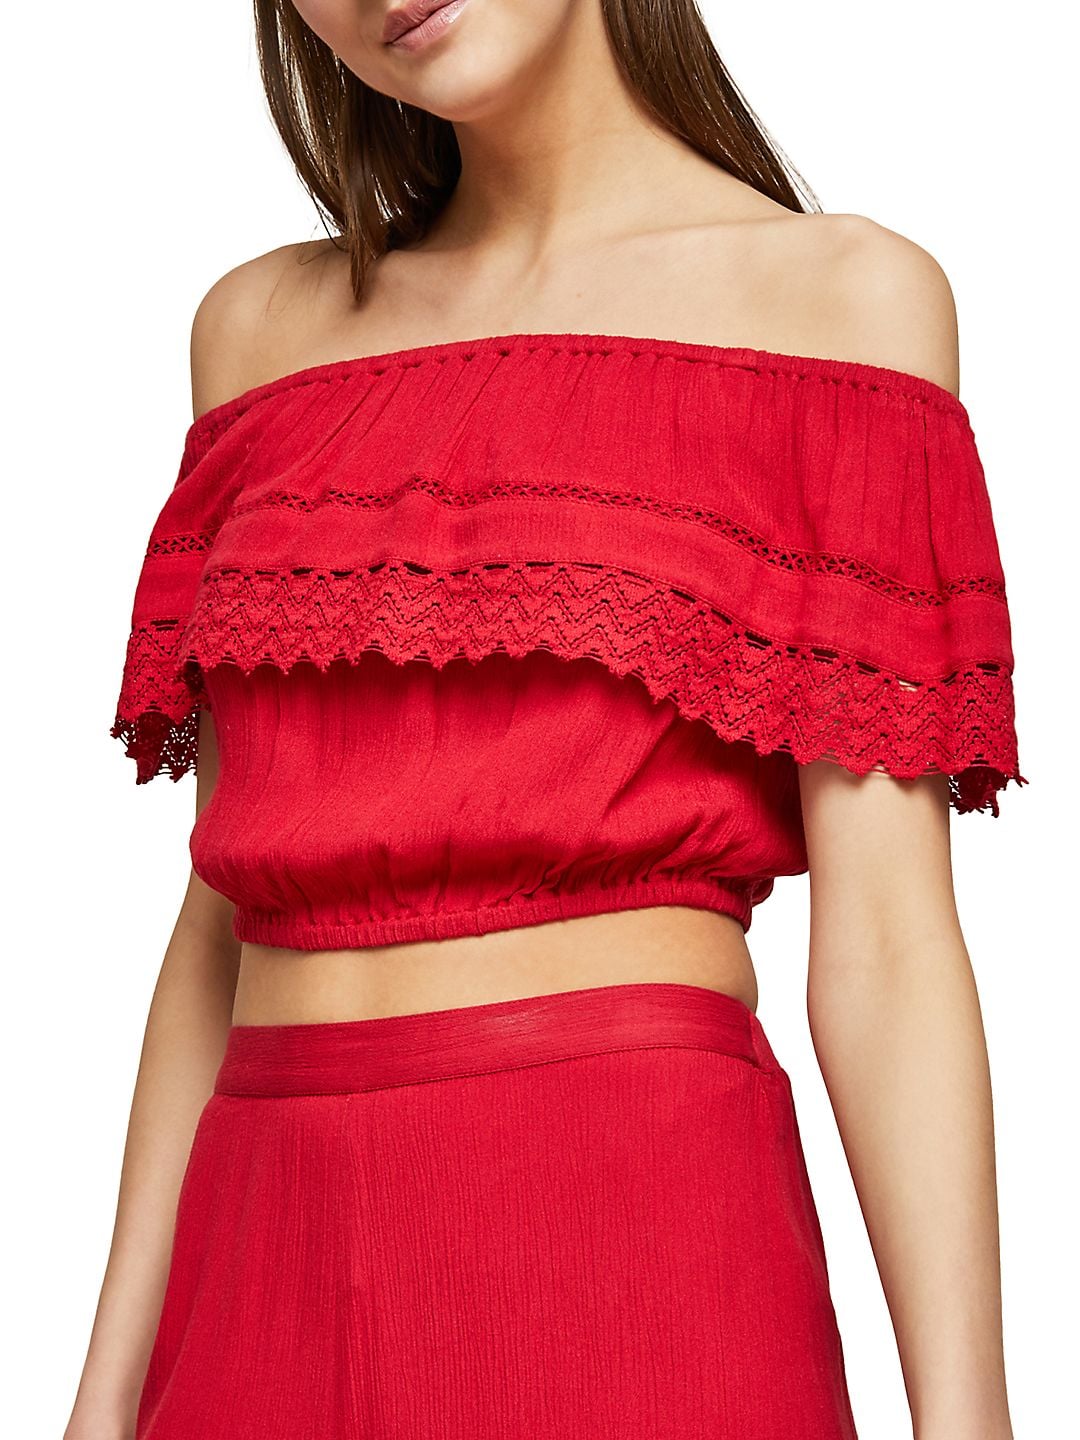 Jane Austen Morse kode klynke Miss Selfridge Crochet Crop Top | Trust Us — You'll Want These 11 Stylish  Tops For Summer, and They're All Under $40 | POPSUGAR Fashion Photo 5